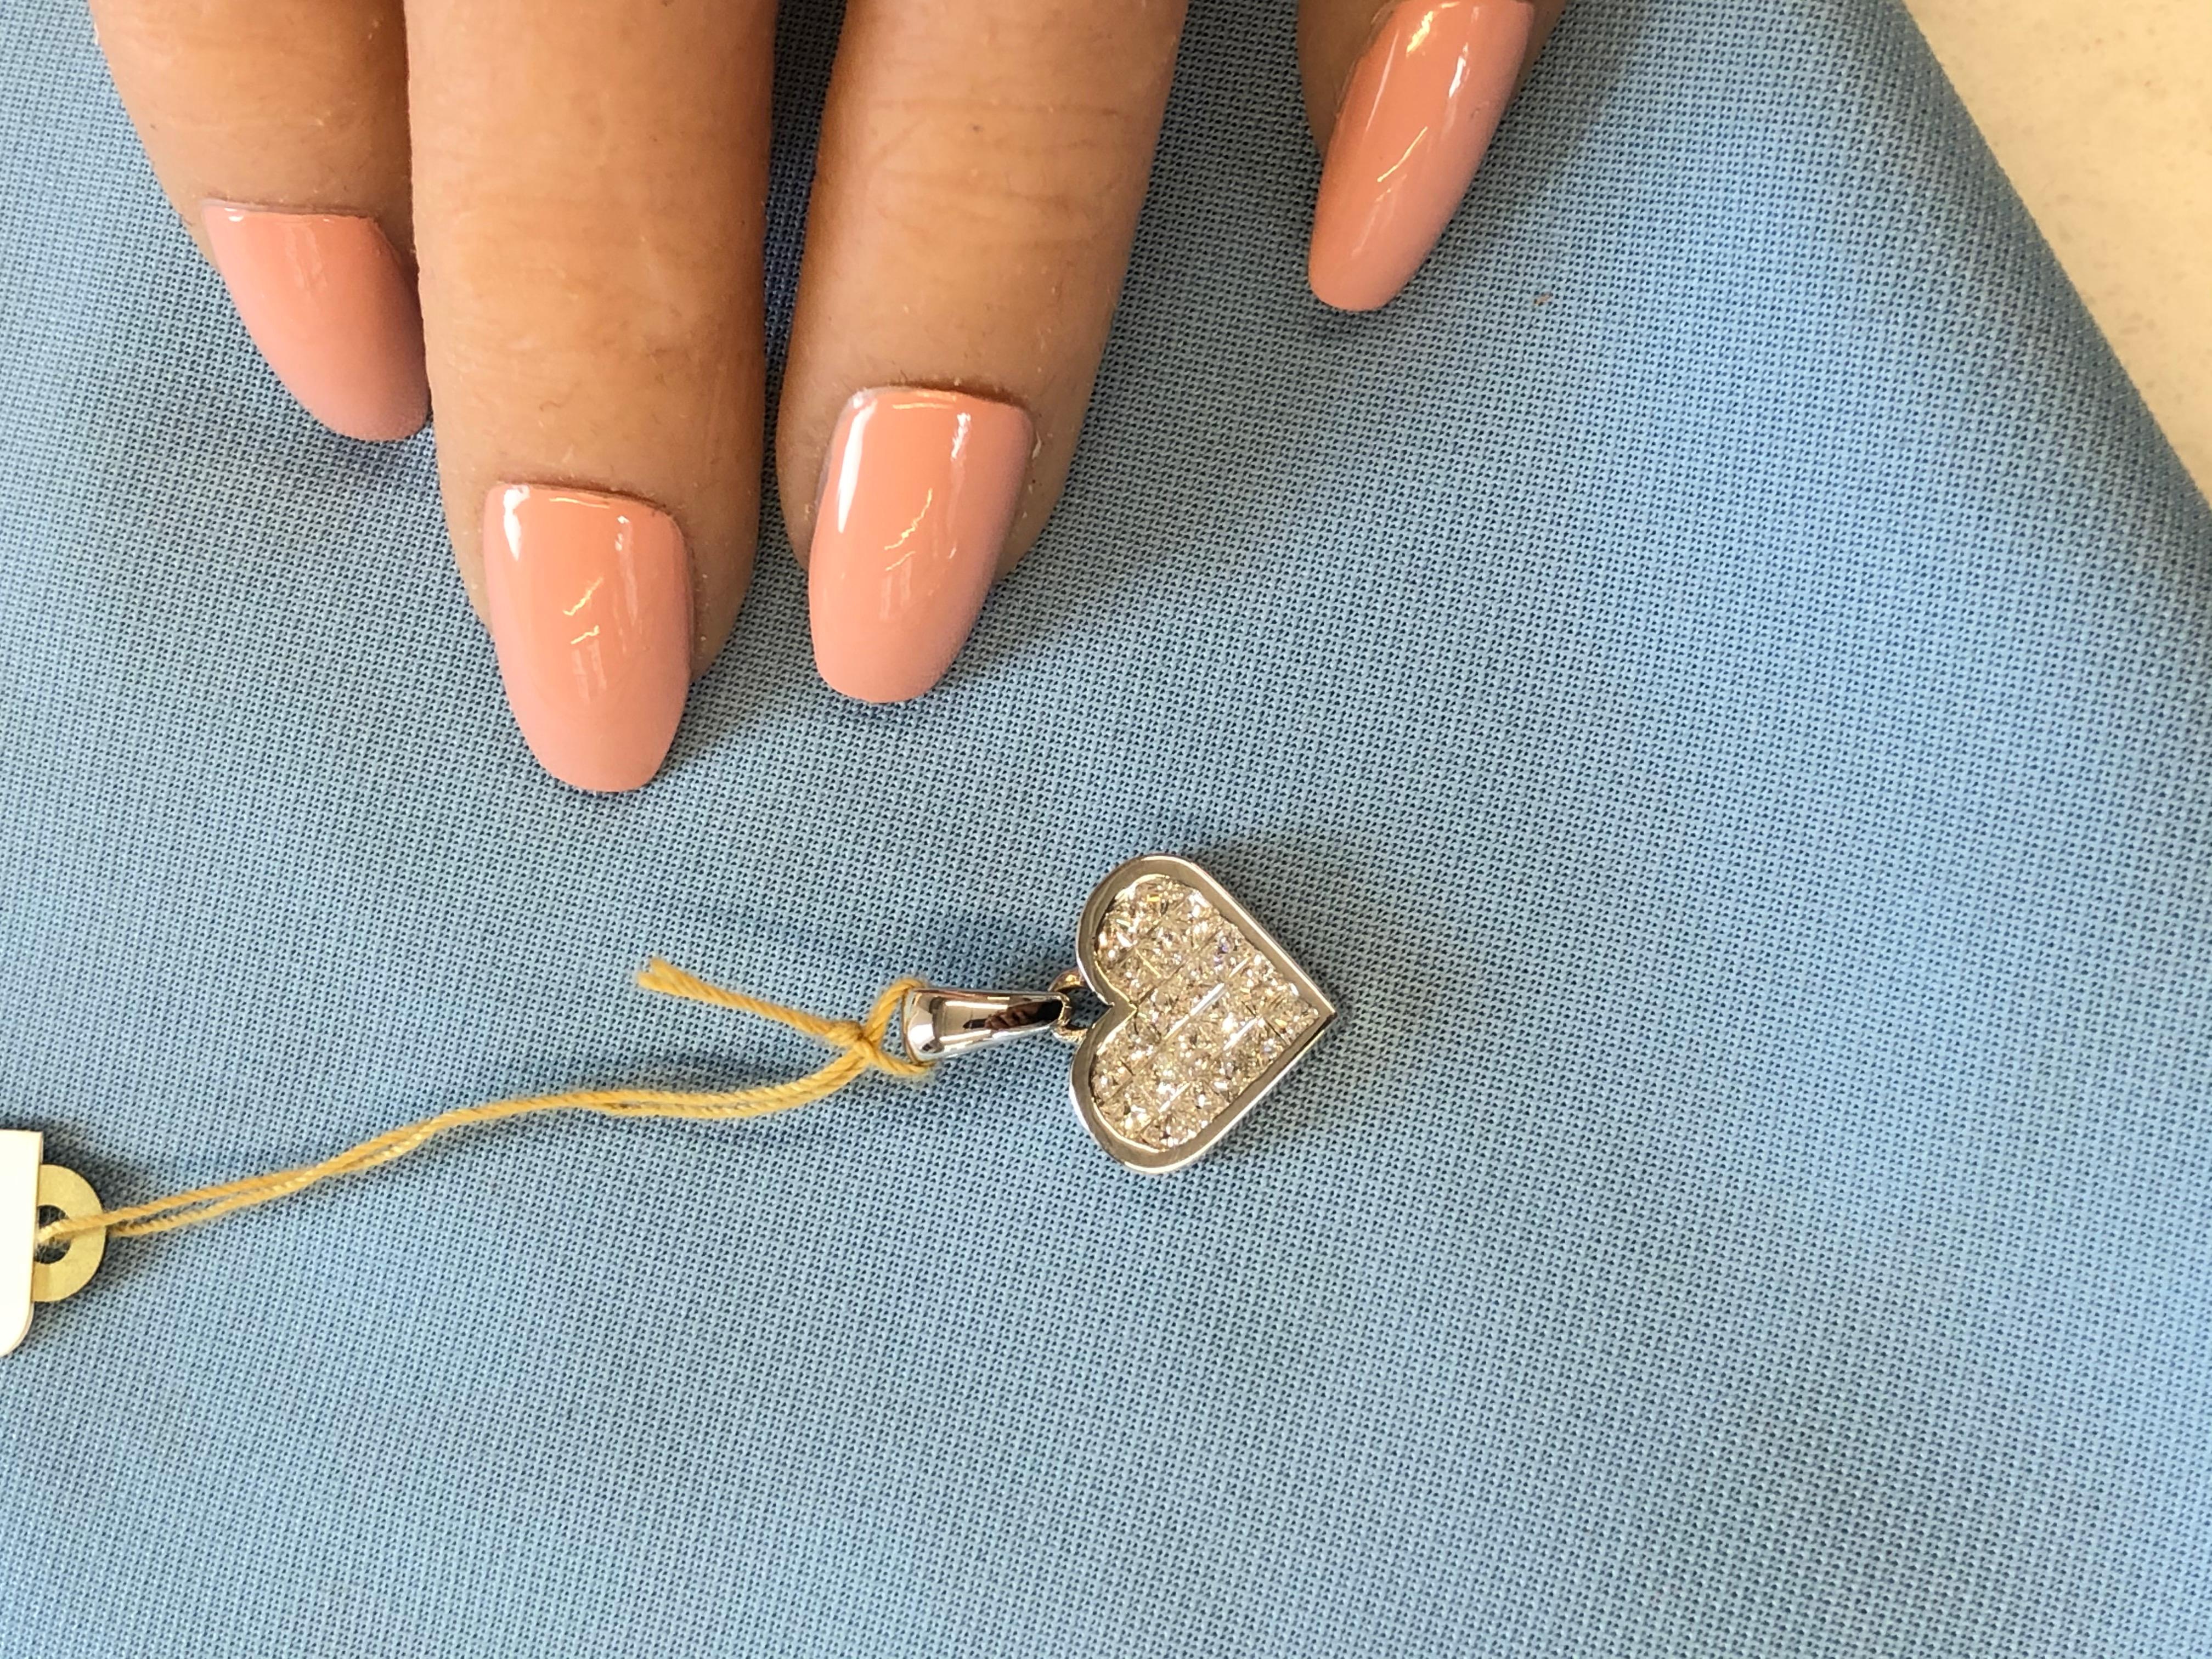 This gorgeous diamond heart pendant is finely crafted in brightly polished 18 karat white gold and features a total of 1.75 carats, F color and VS clarity, of invisibly set princess cut diamonds that are beautifully  arranged in a stunning heart